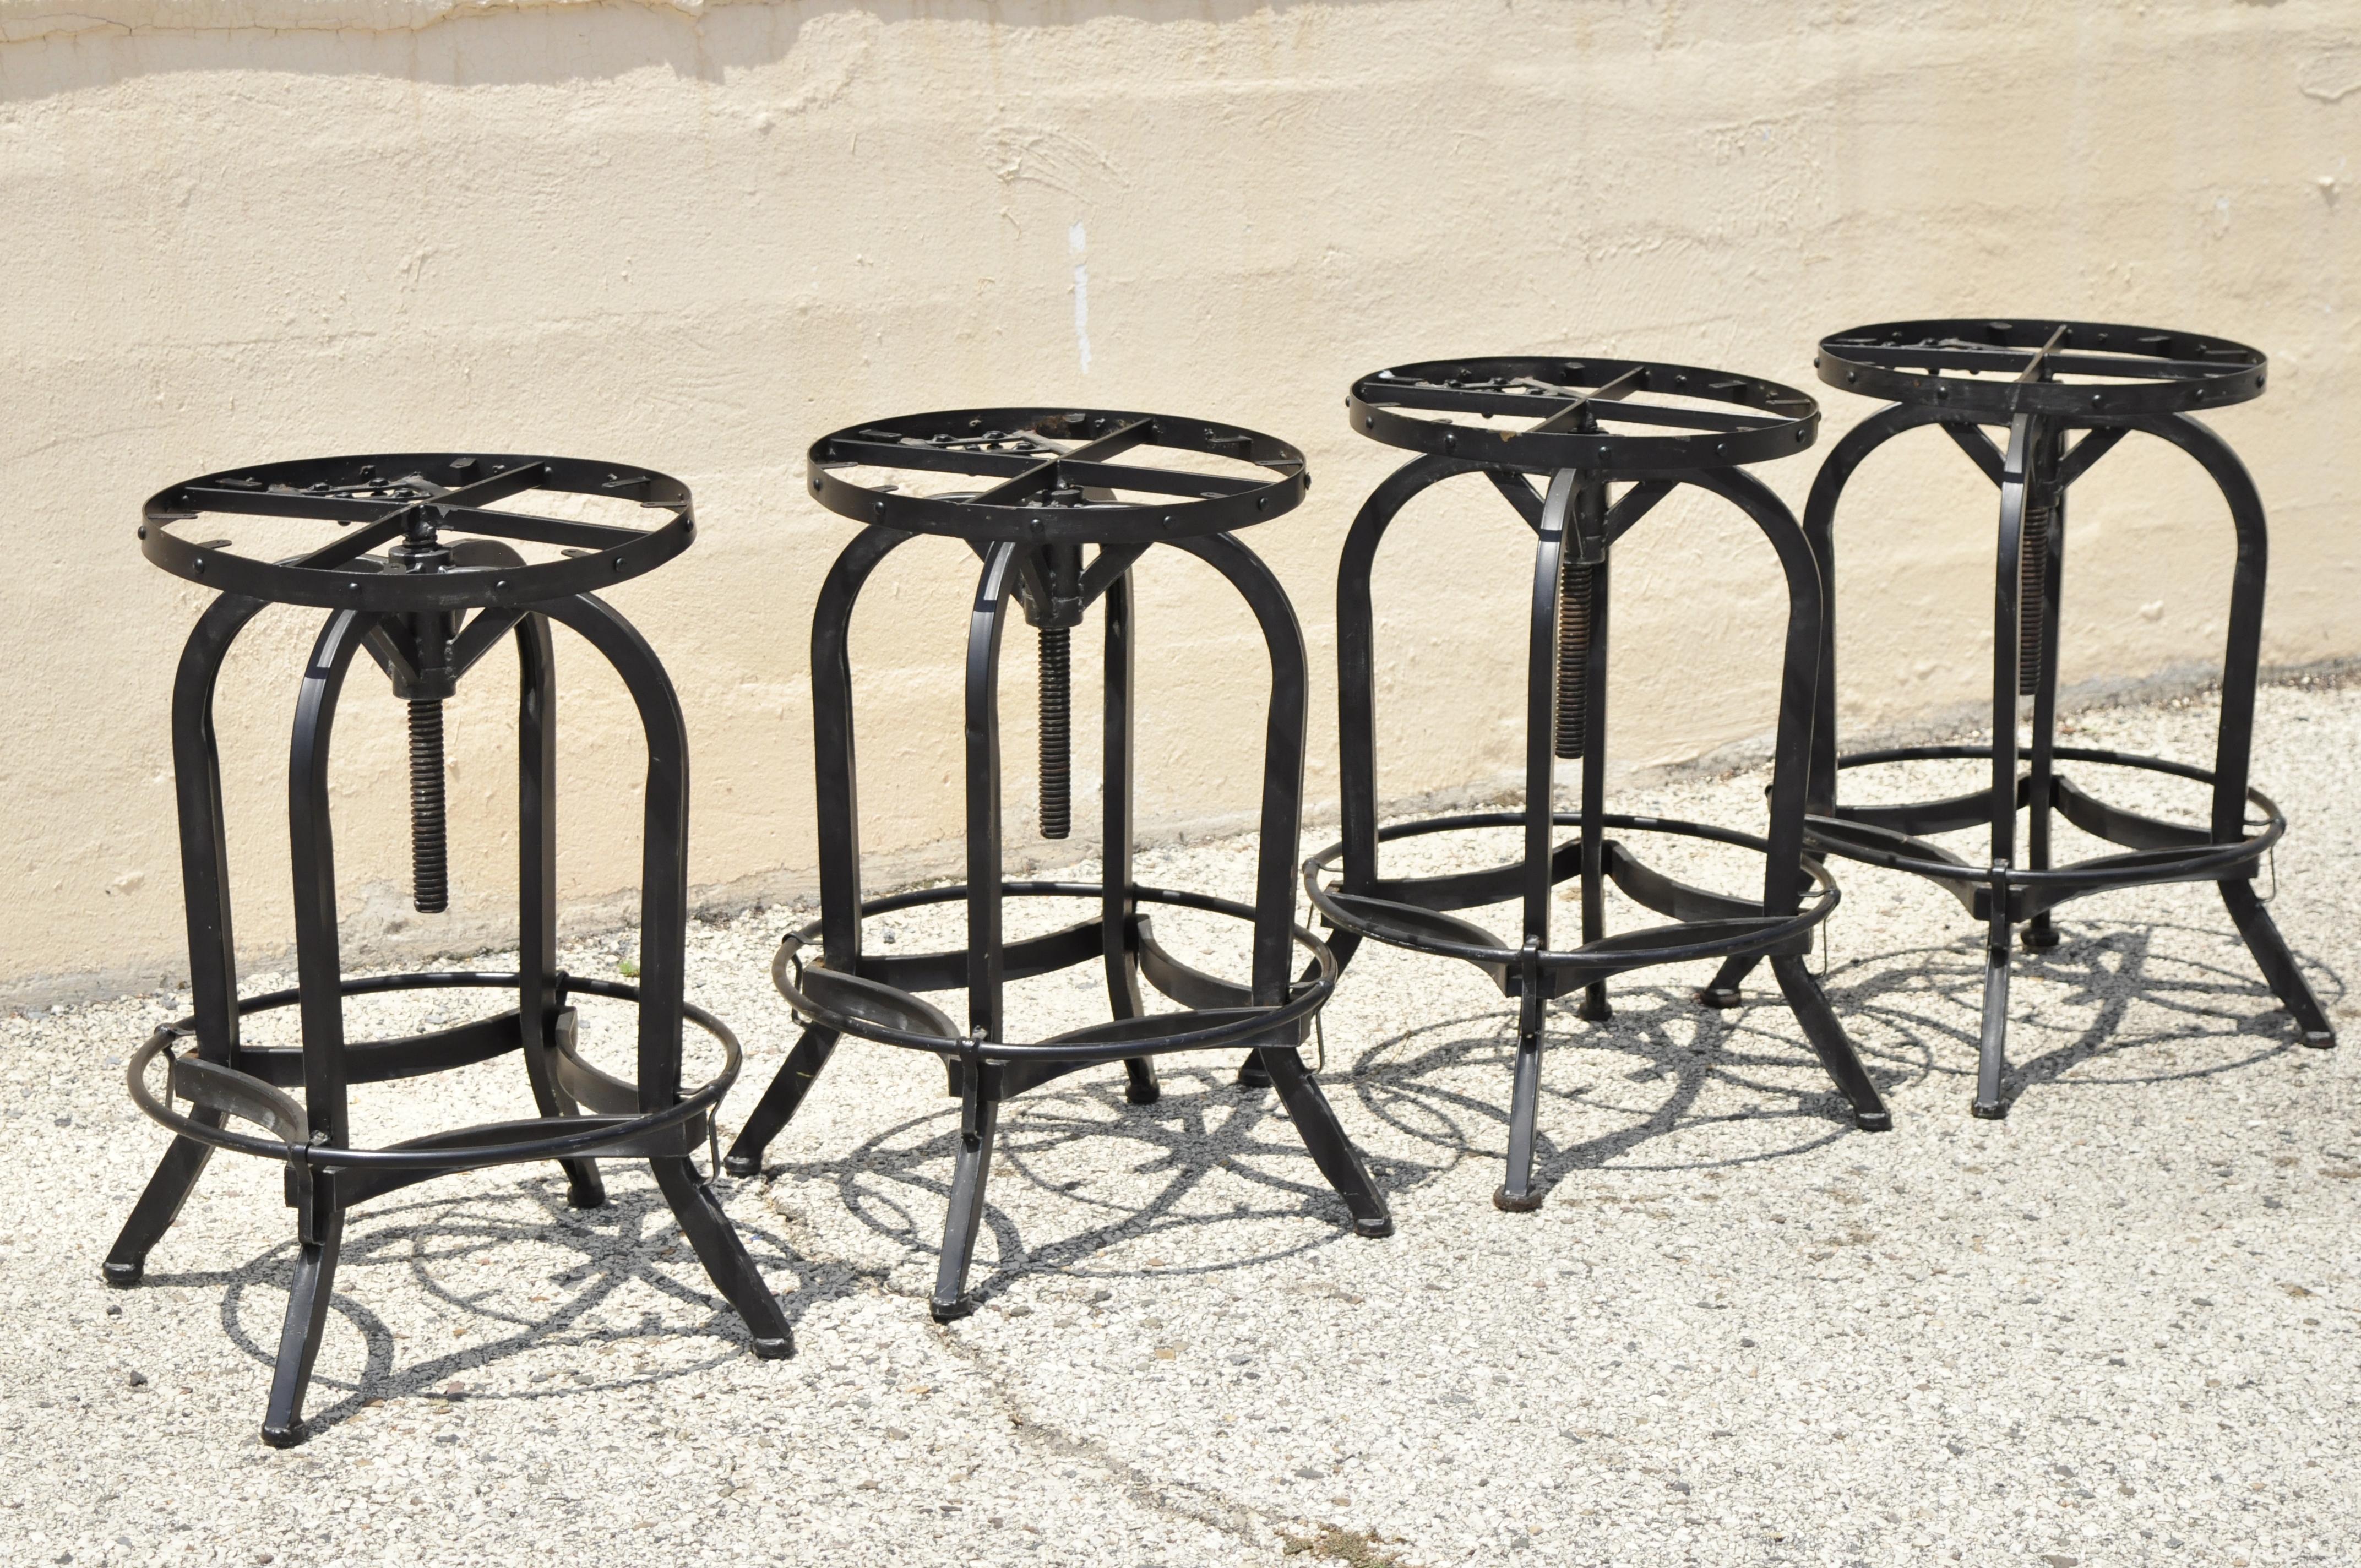 Industrial Style Iron Frame Adjustable Height Swivel Bar Stools - Set of 4. Item features (4) adjustable height stools, iron construction, swivel seat, great style and form. Circa 21st Century, Pre-owned. Measurements: 26.5 - 33